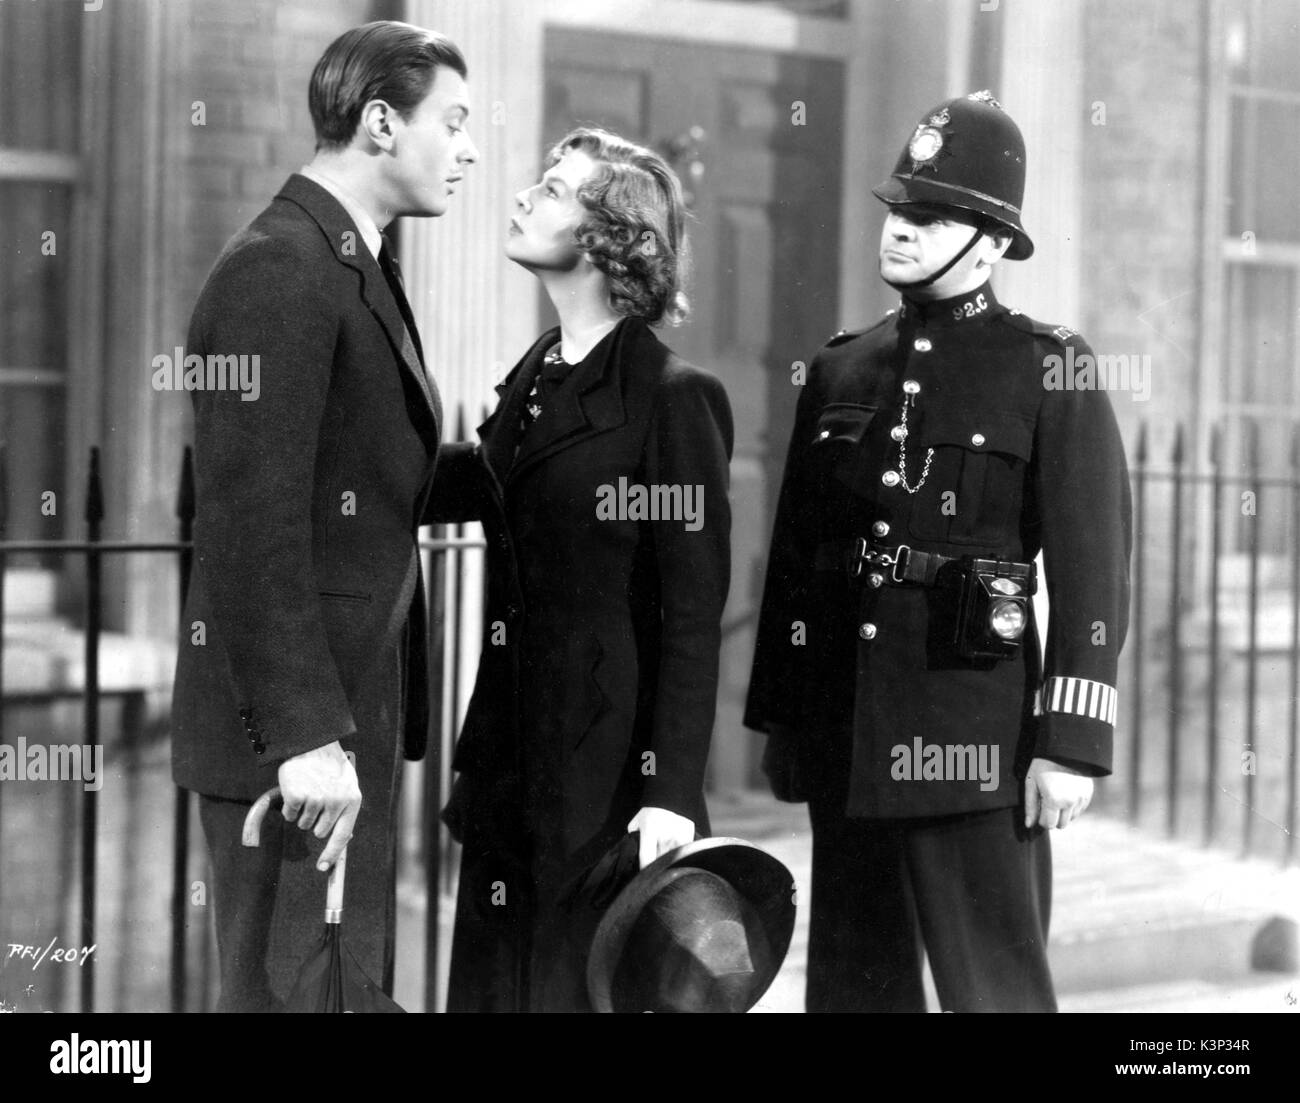 PYGMALION [BR 1938] DAVID TREE as Freddy Eynsford-Hill, WENDY HILLER as Eliza Doolittle, CECIL TROUNCER as First Policeman     Date: 1938 Stock Photo